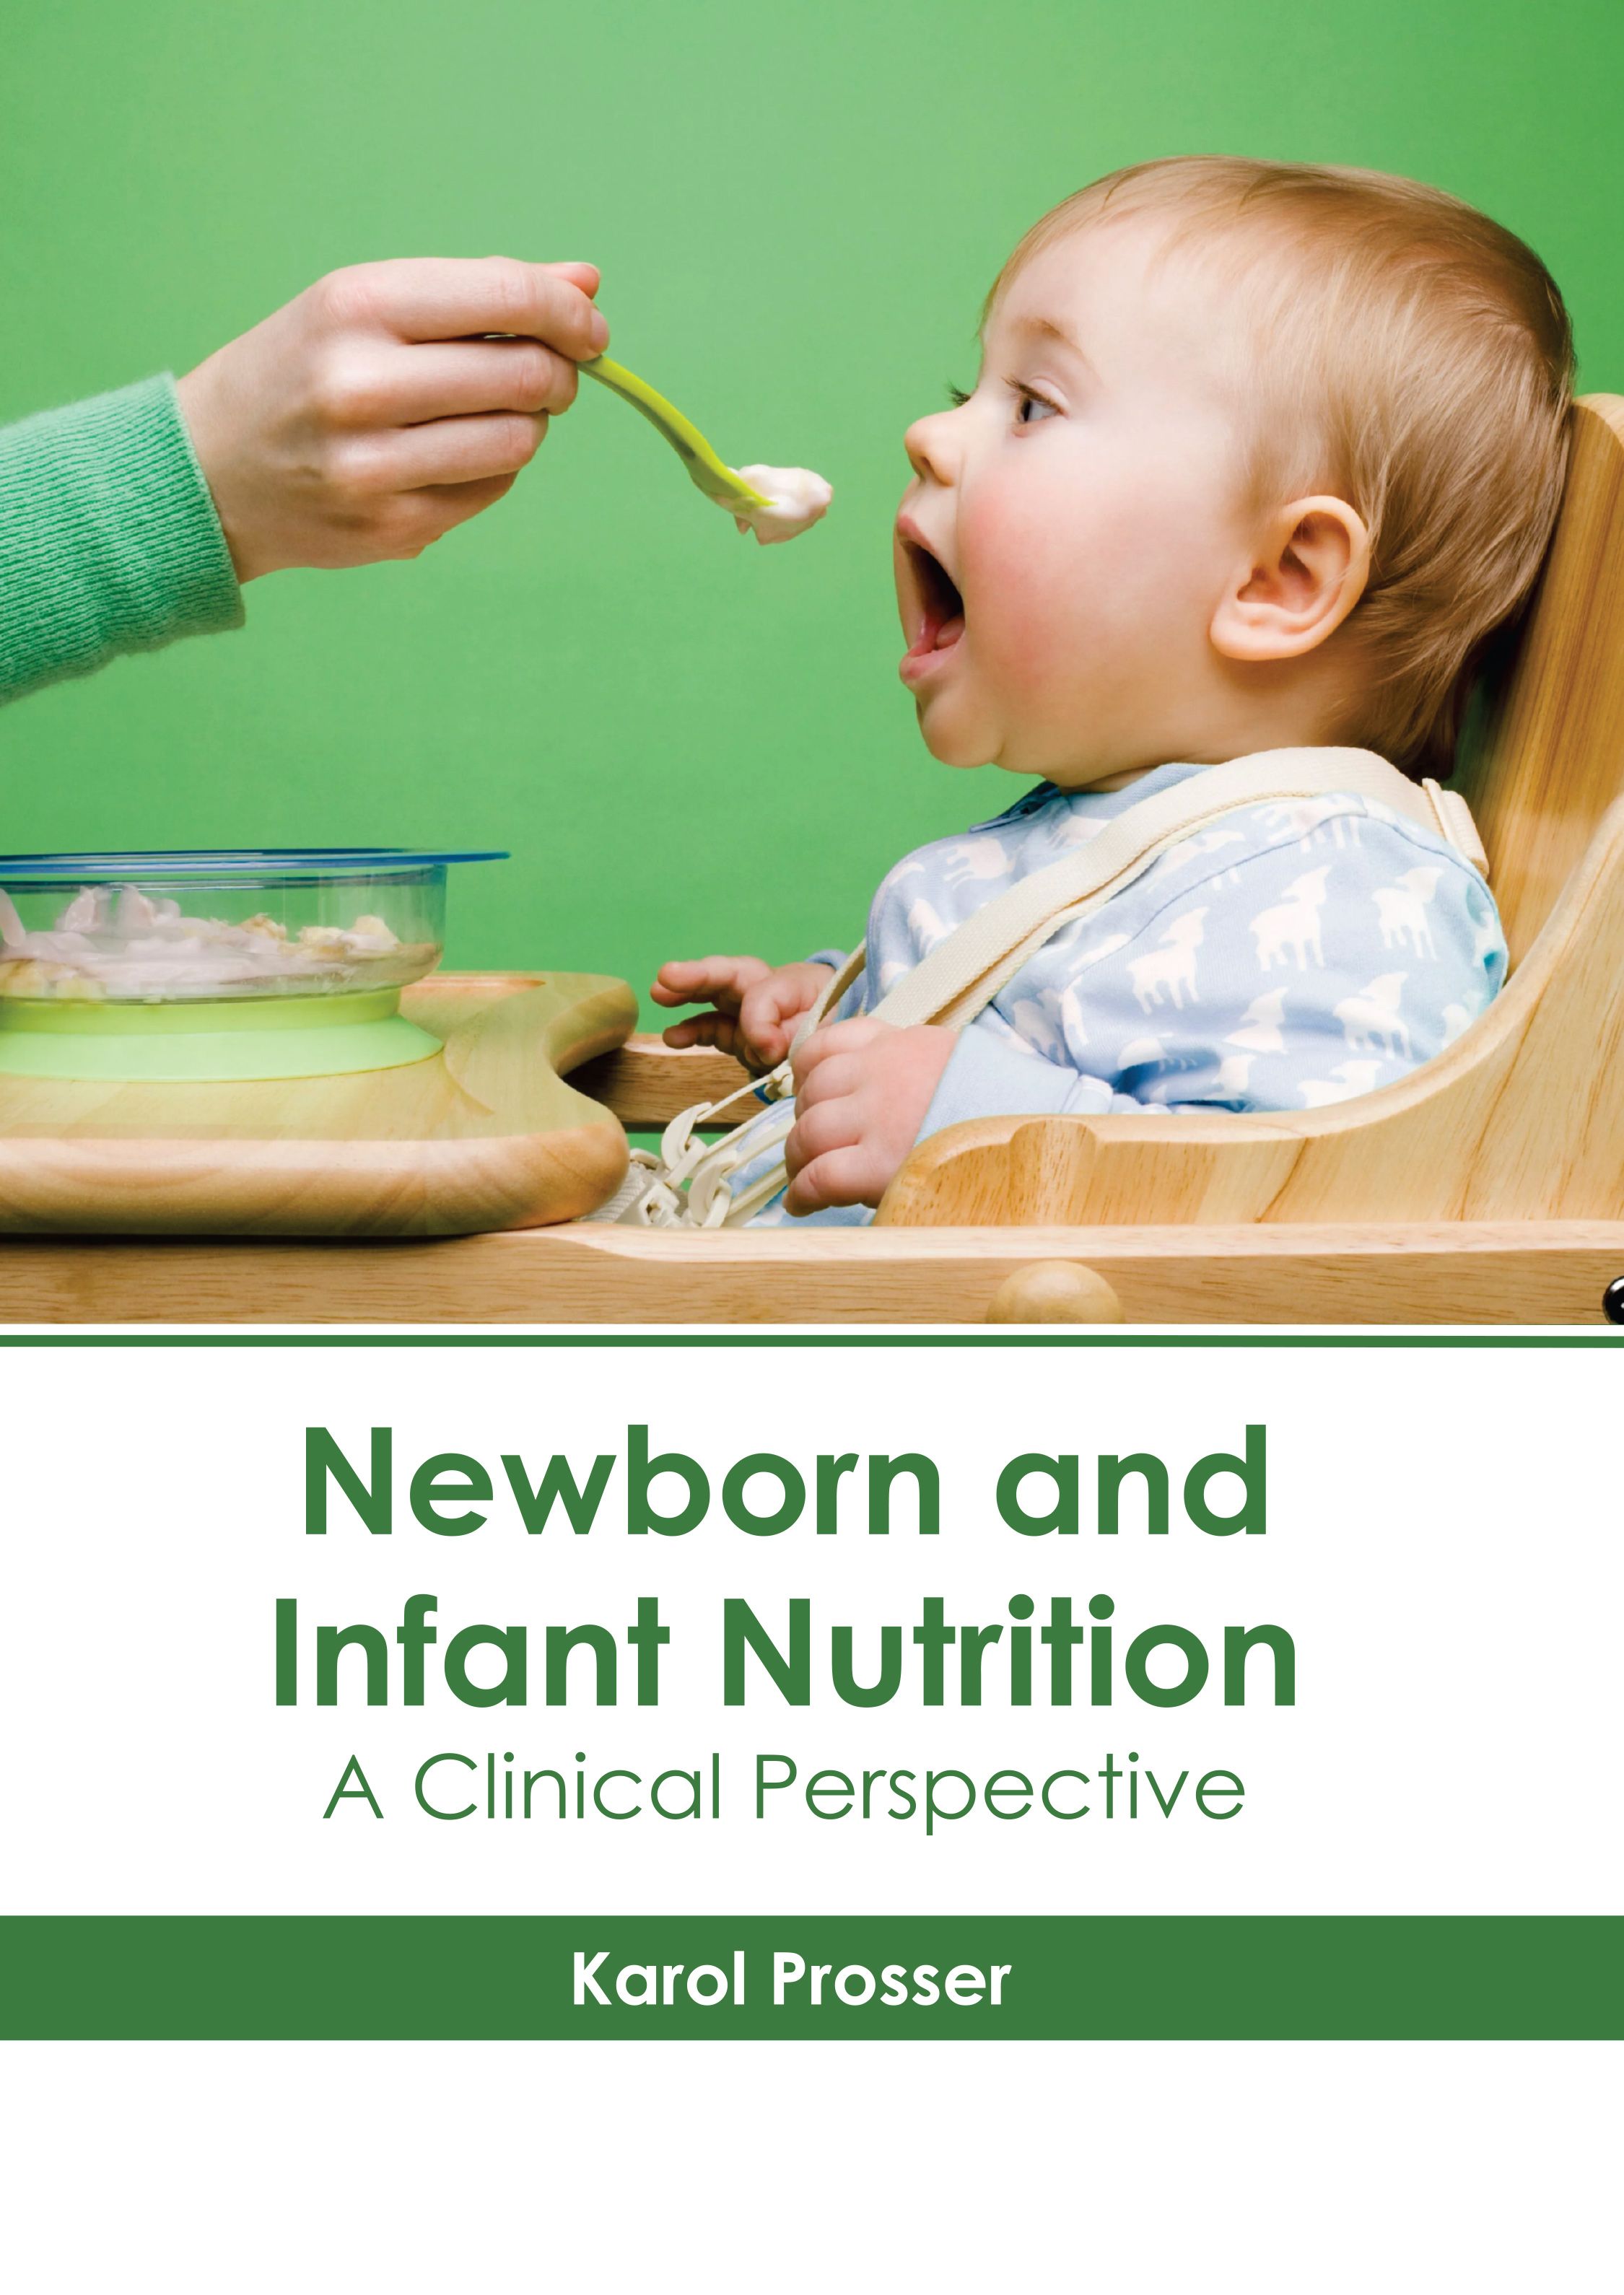 

exclusive-publishers/american-medical-publishers/newborn-and-infant-nutrition-a-clinical-perspective-9781639277537